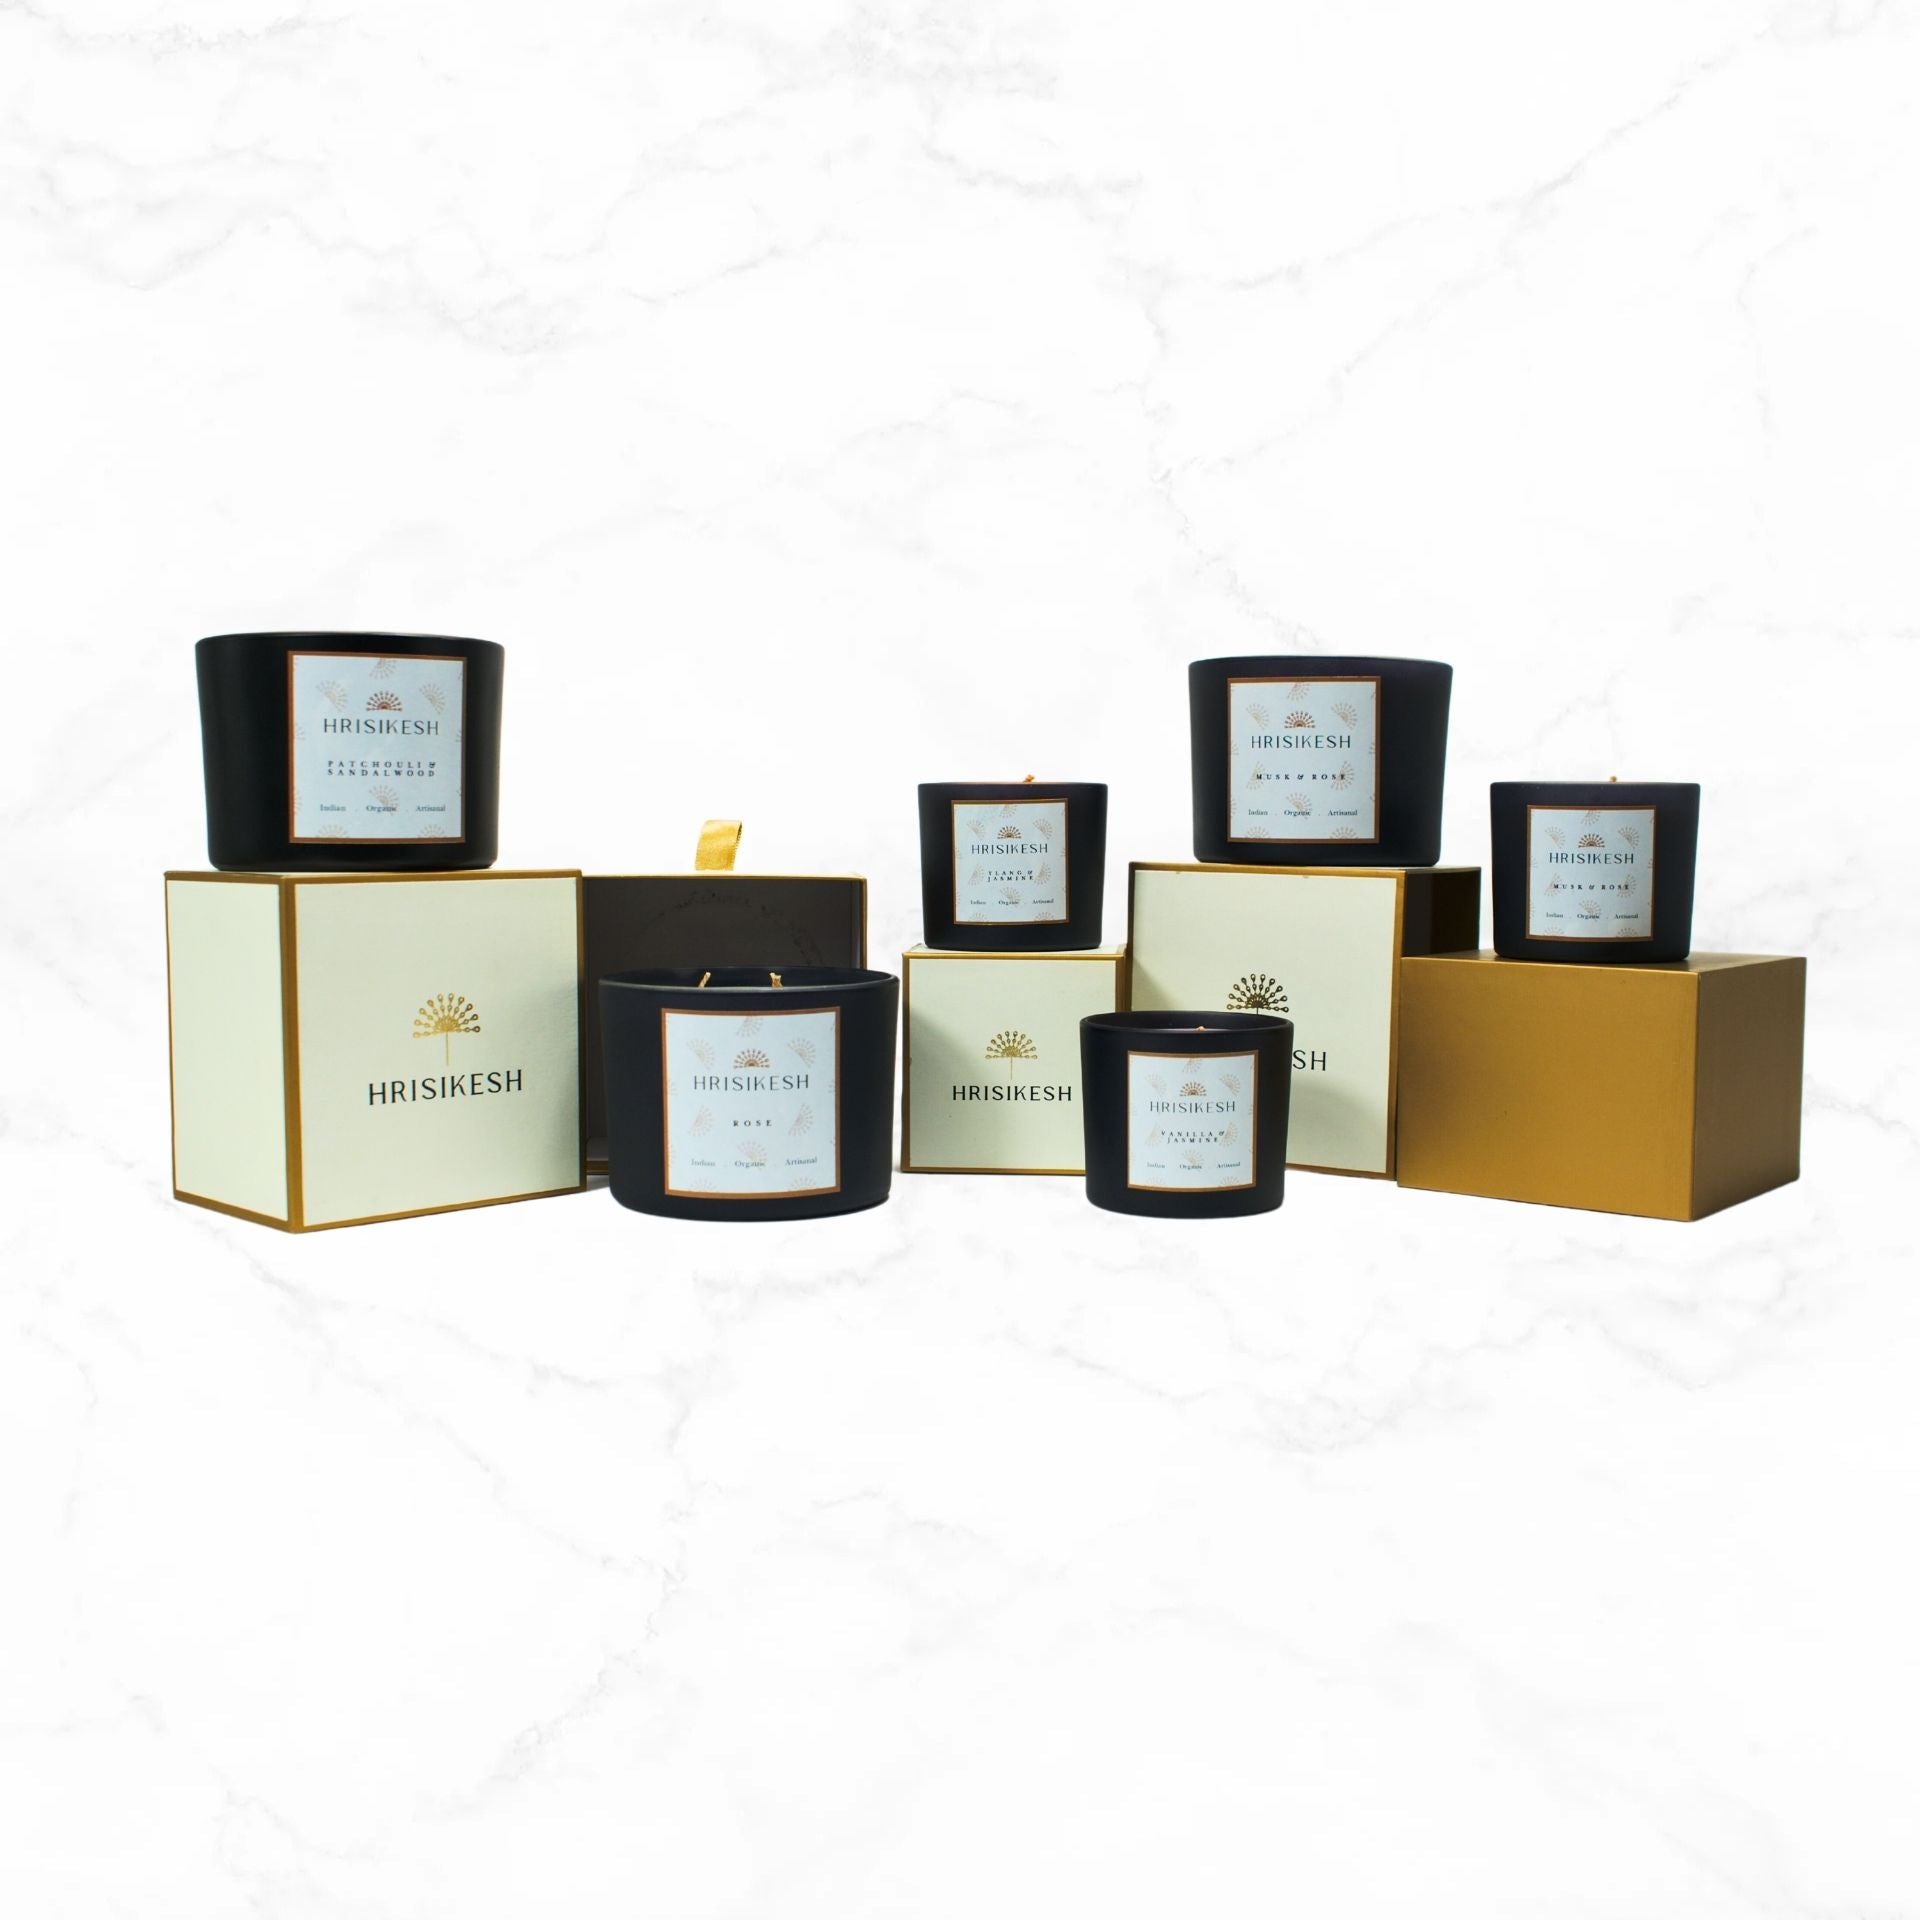 Ylang & Jasmine Scented Candles